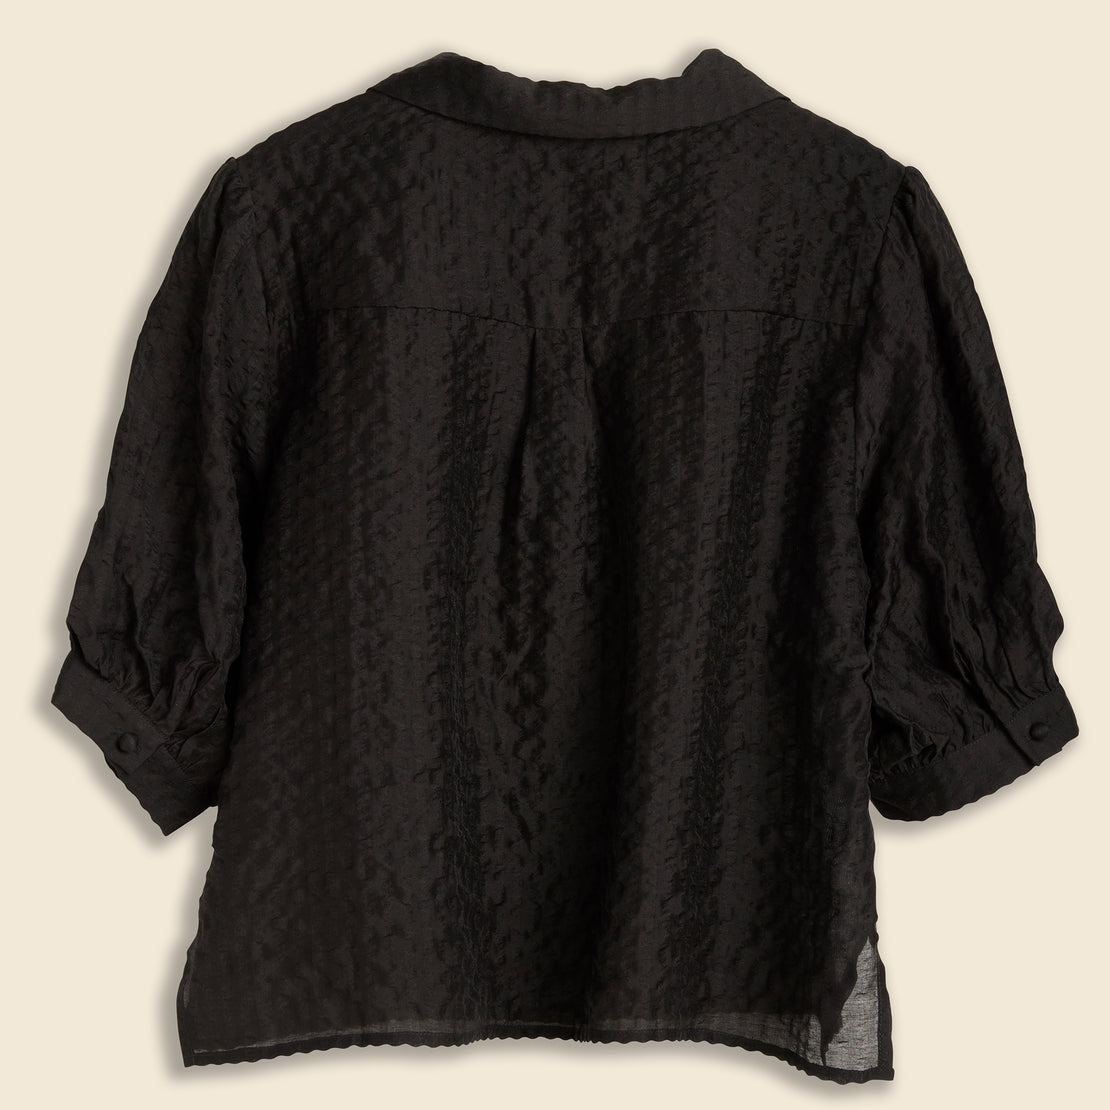 Calina Cropped Shirt - Black - Le Mont Saint Michel - STAG Provisions - W - Tops - S/S Woven